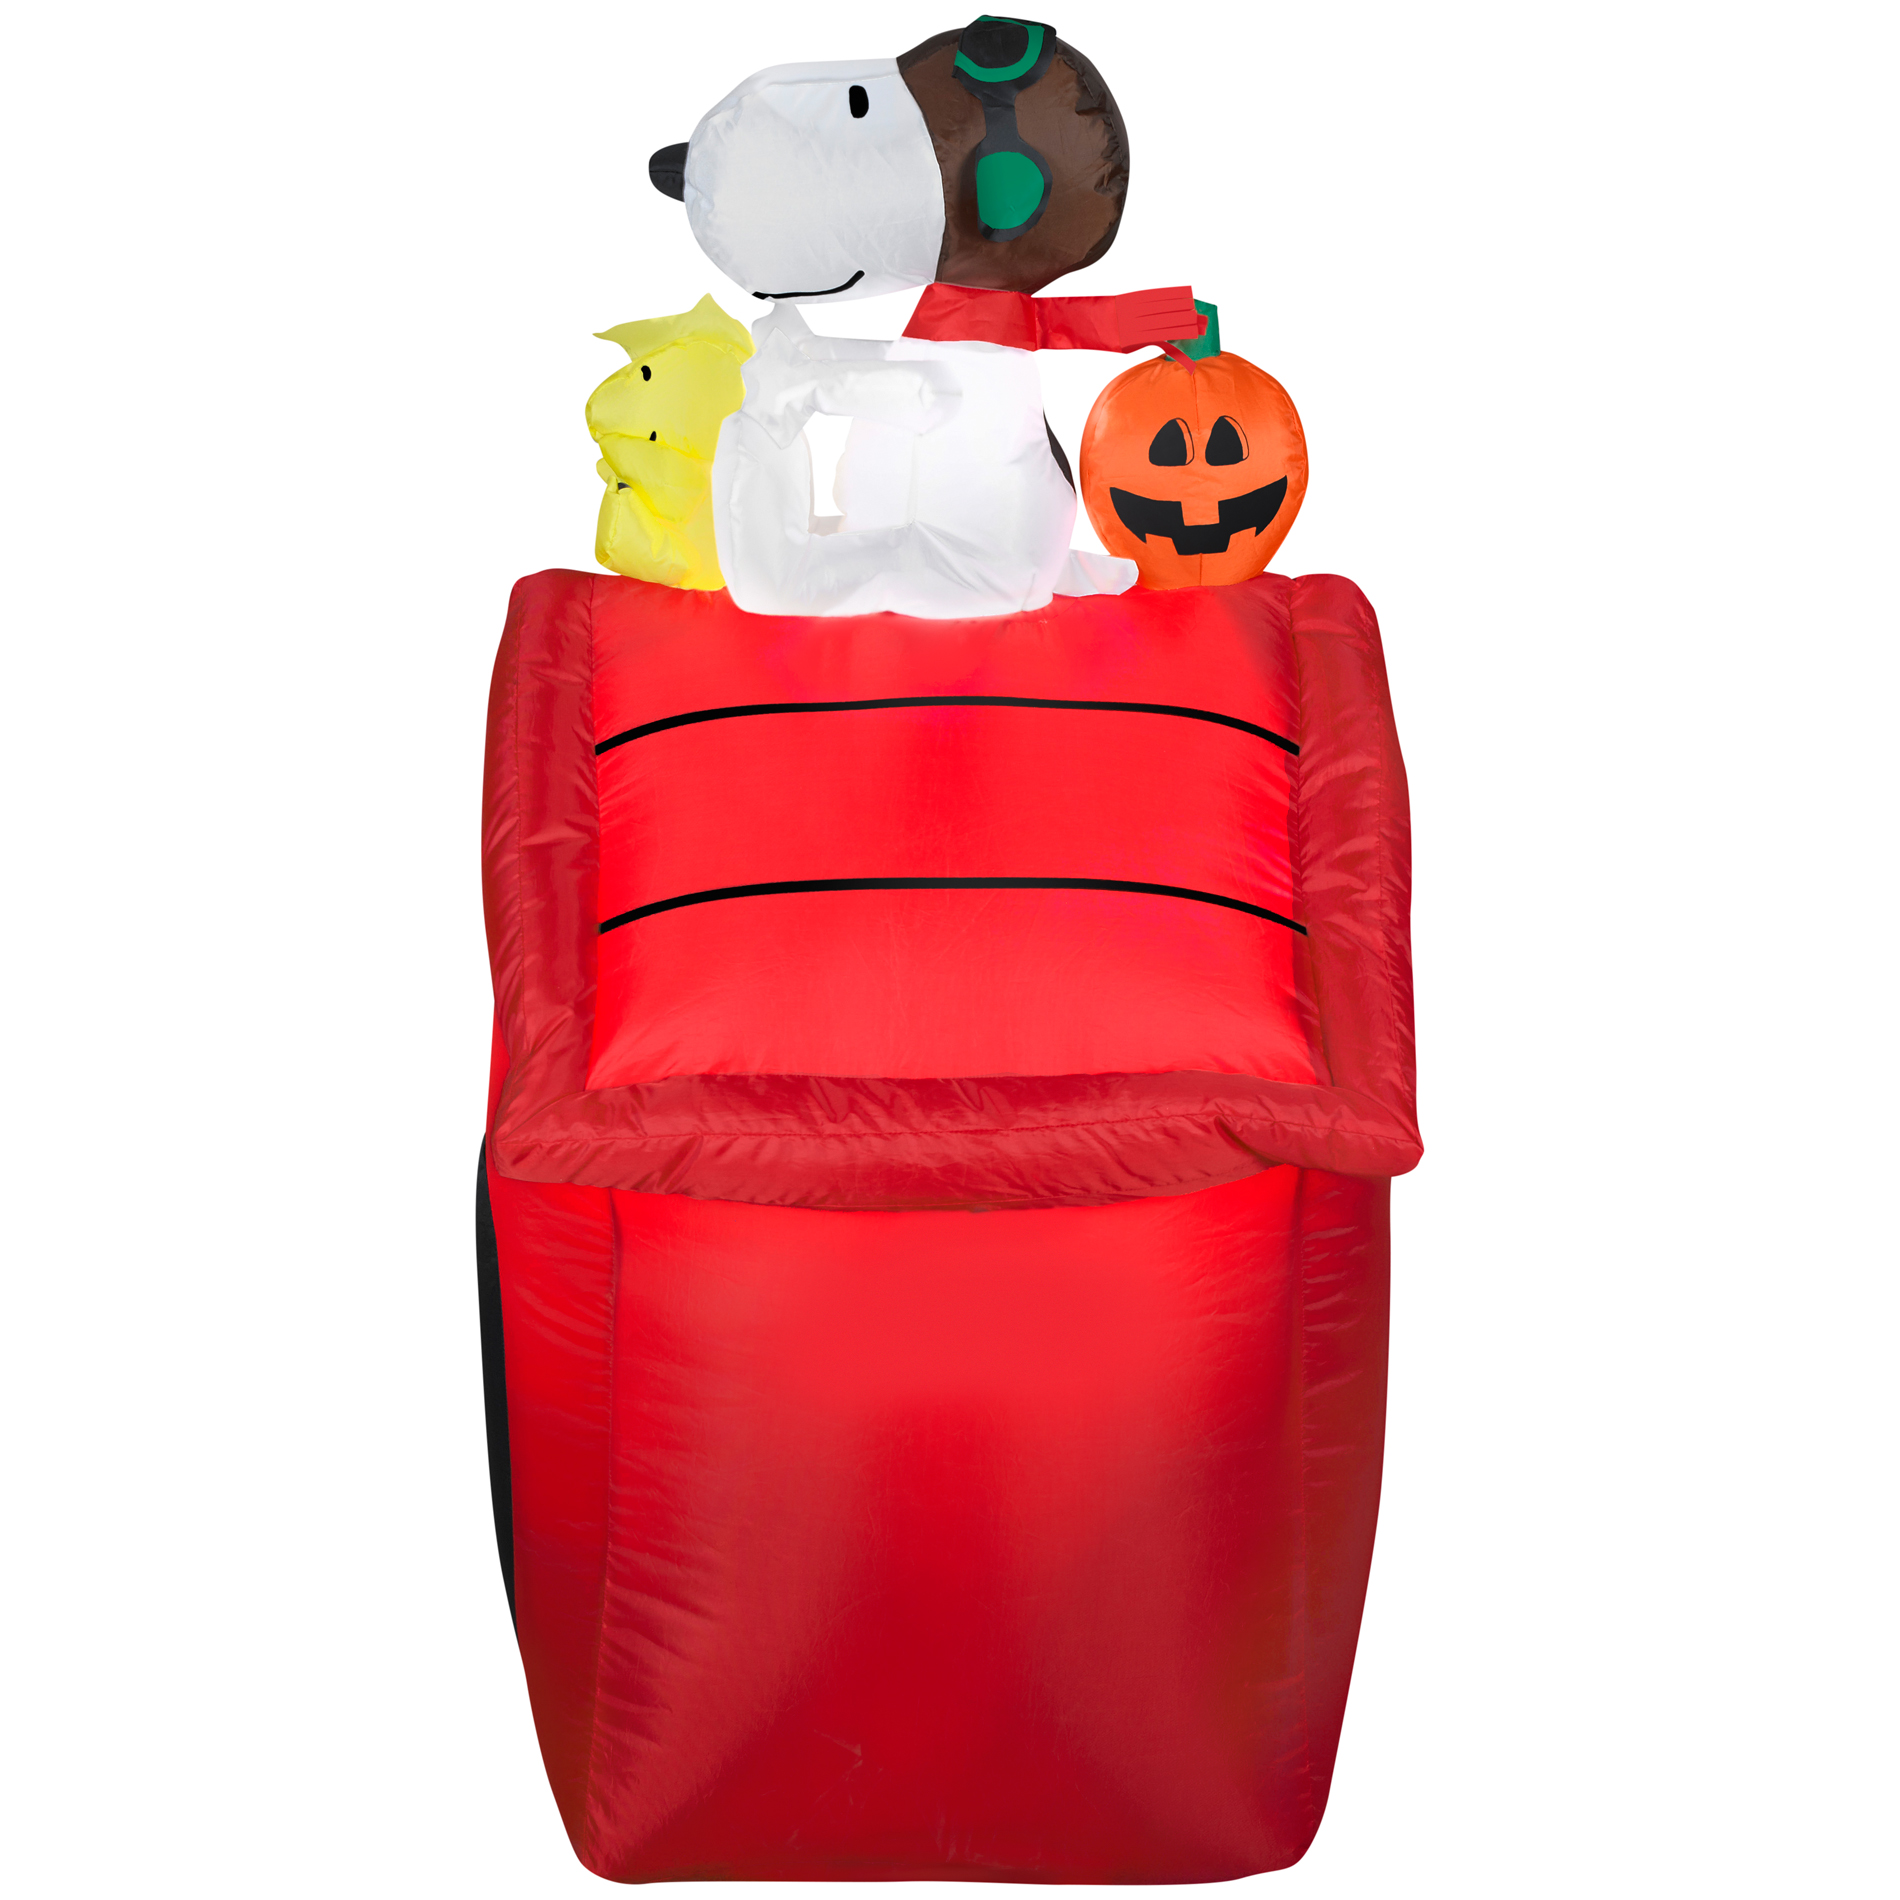 Peanuts By Schulz 3.5ft Snoopy on Dog House Airblown